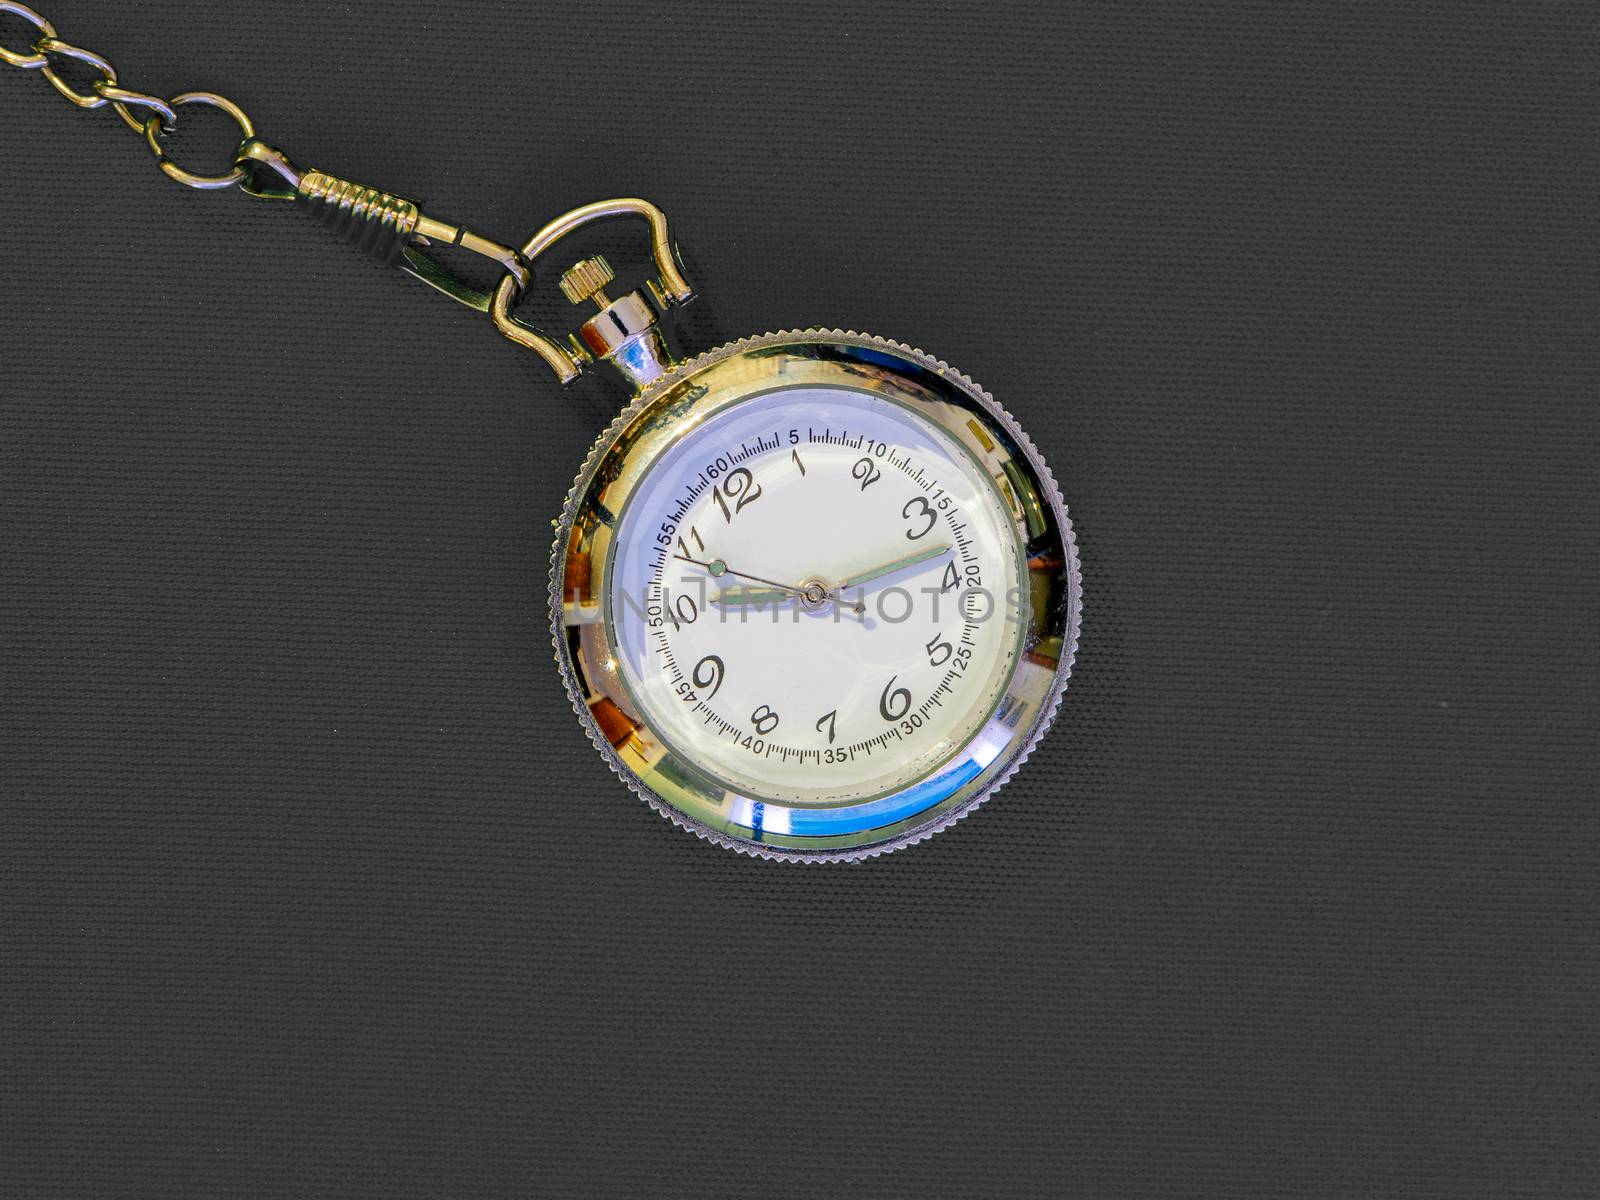 Small steel pocket watch with white dial, metal object on gray uniform background